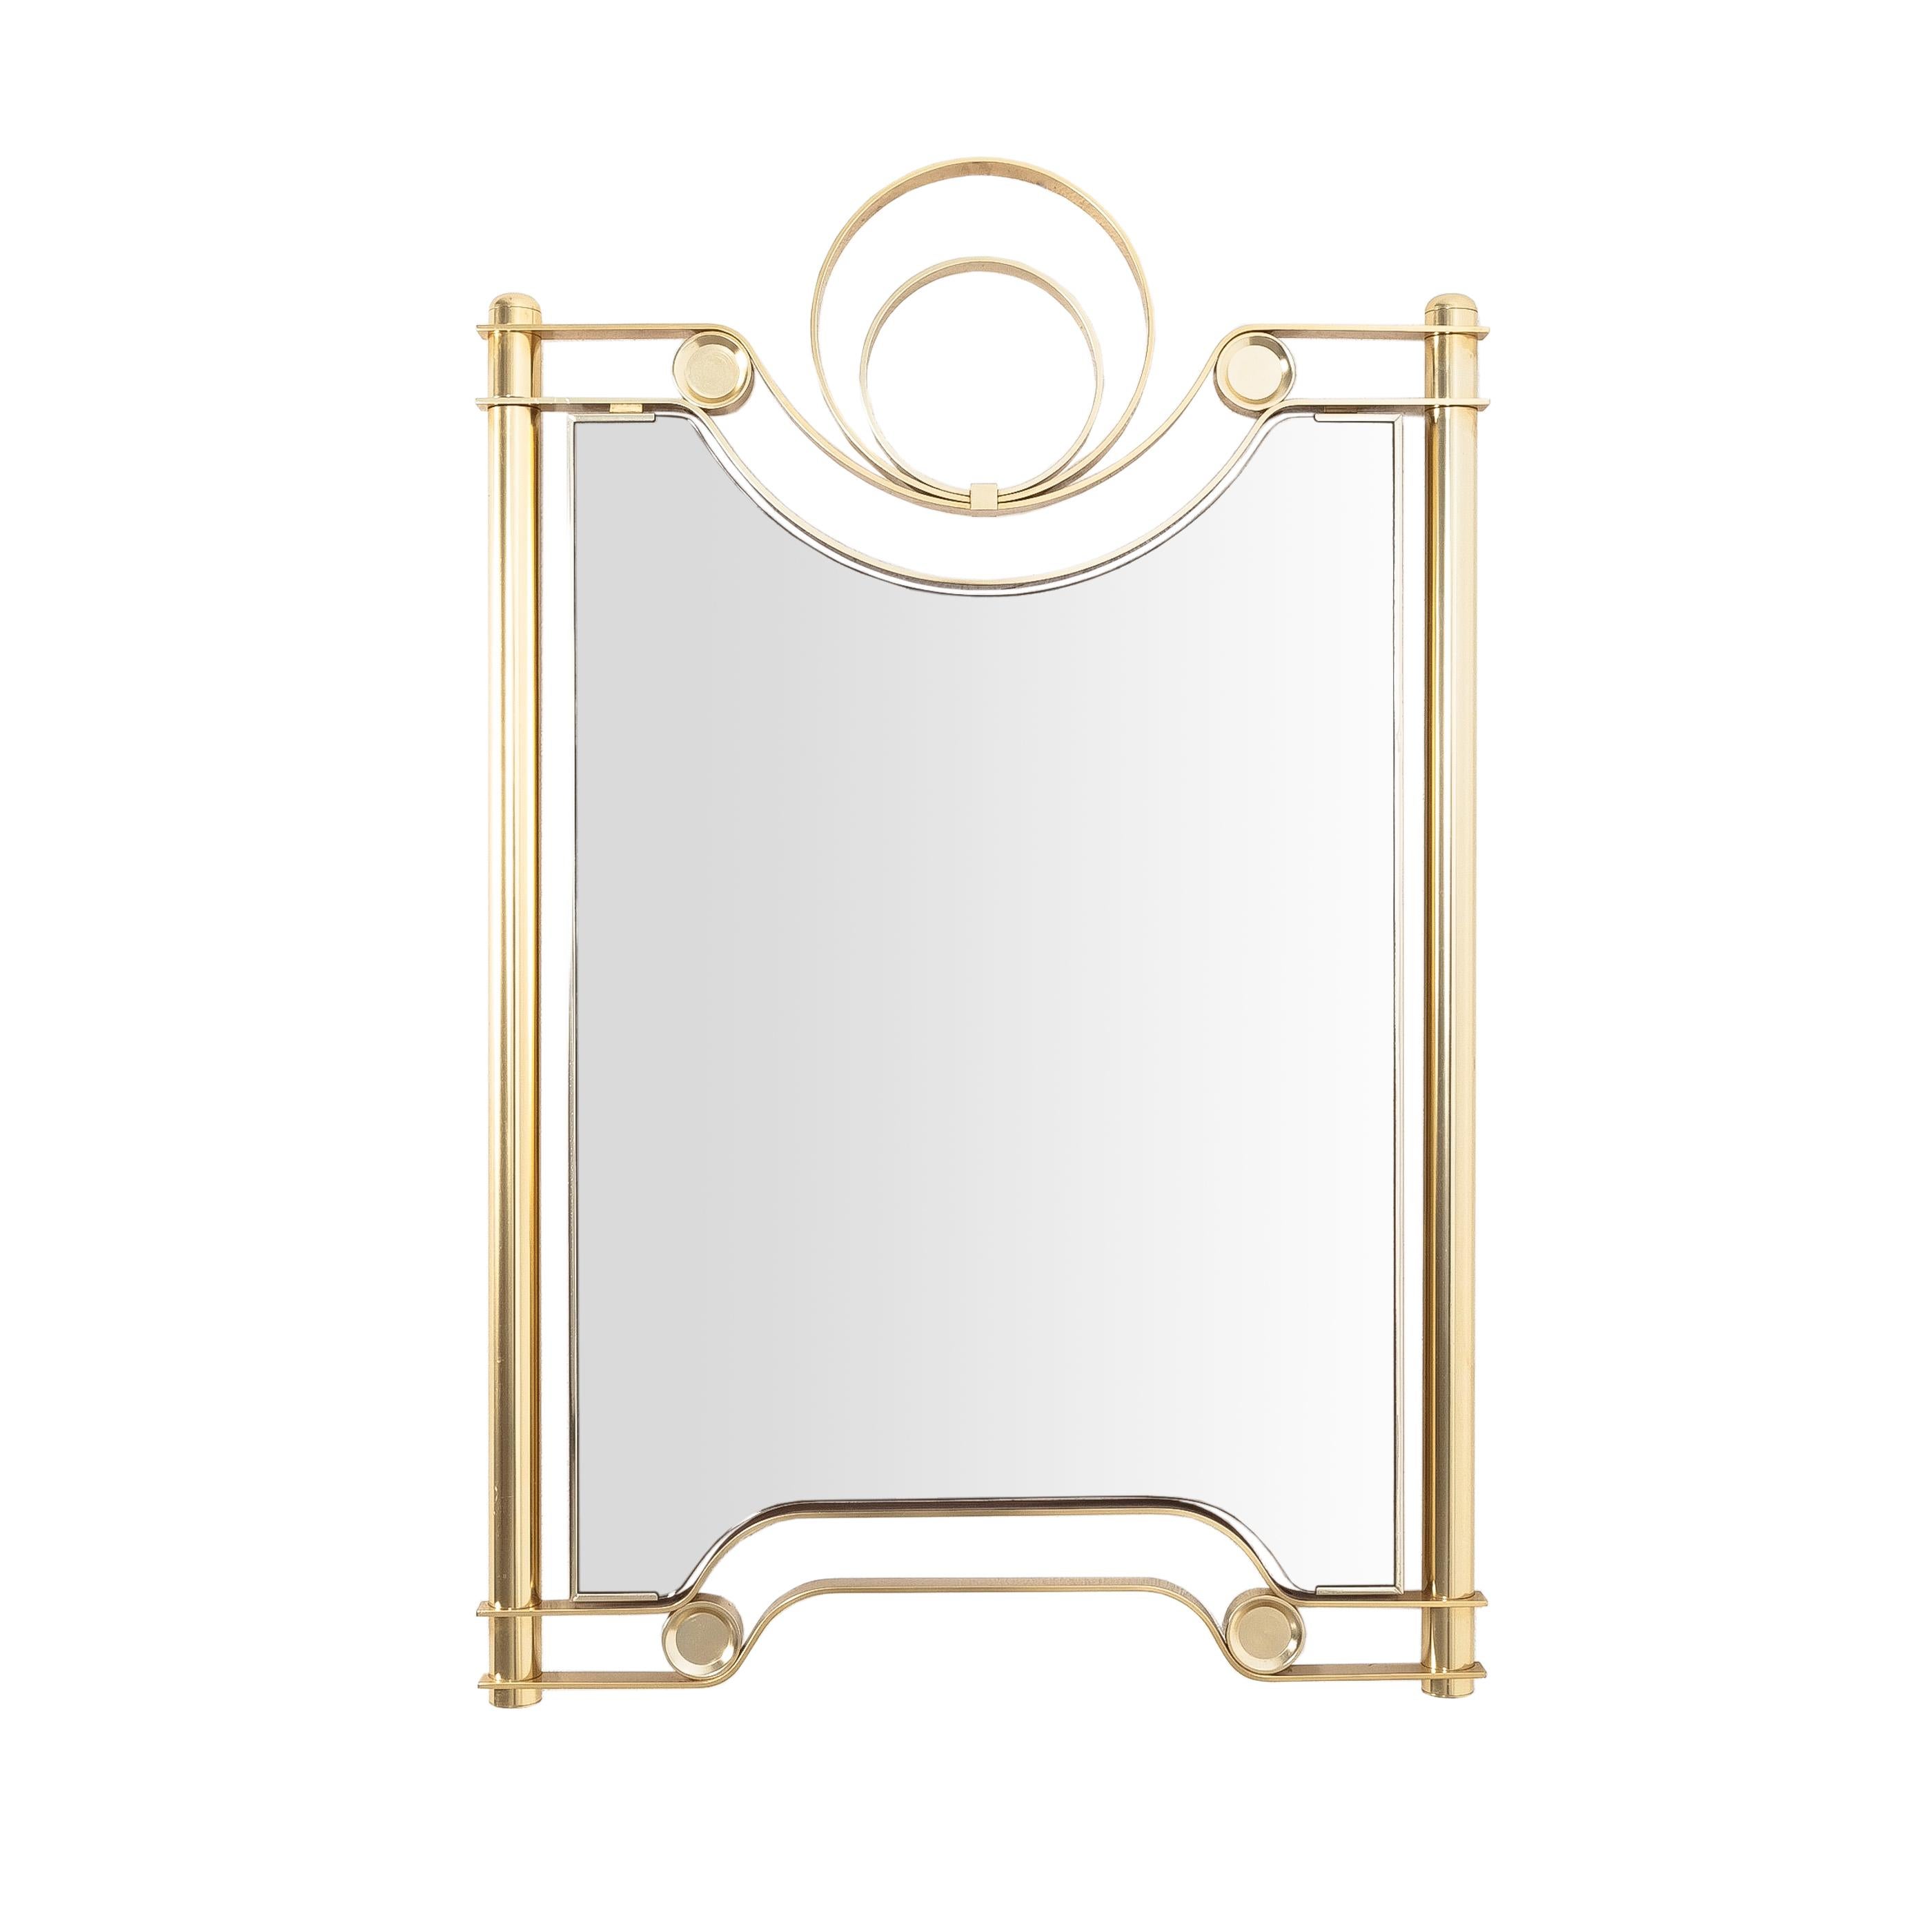 Midcentury Mirror with Golden Twisted Frame, Italy, circa 1965 In Good Condition For Sale In Vienna, AT